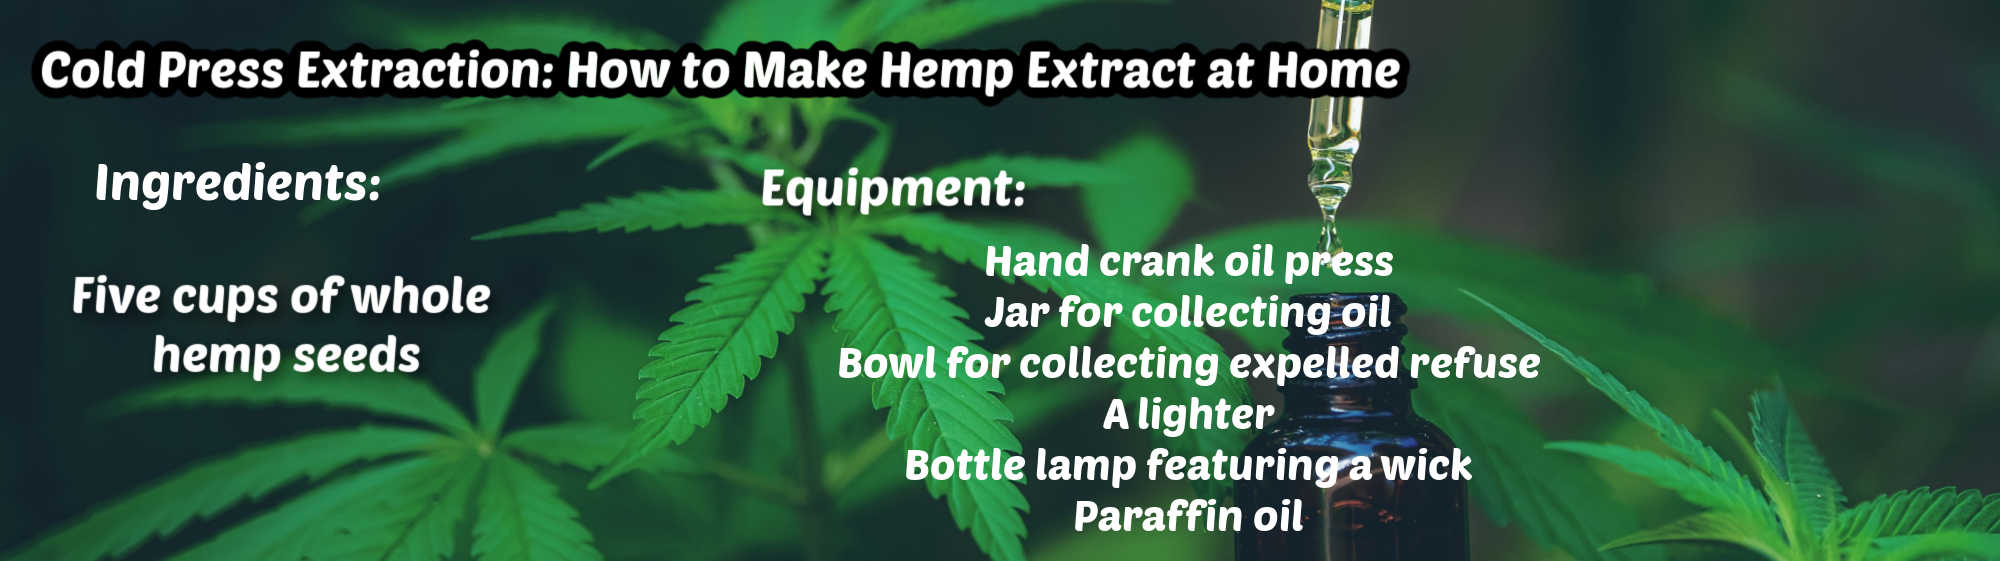 image of cold press extraction how to make hemp extract at home